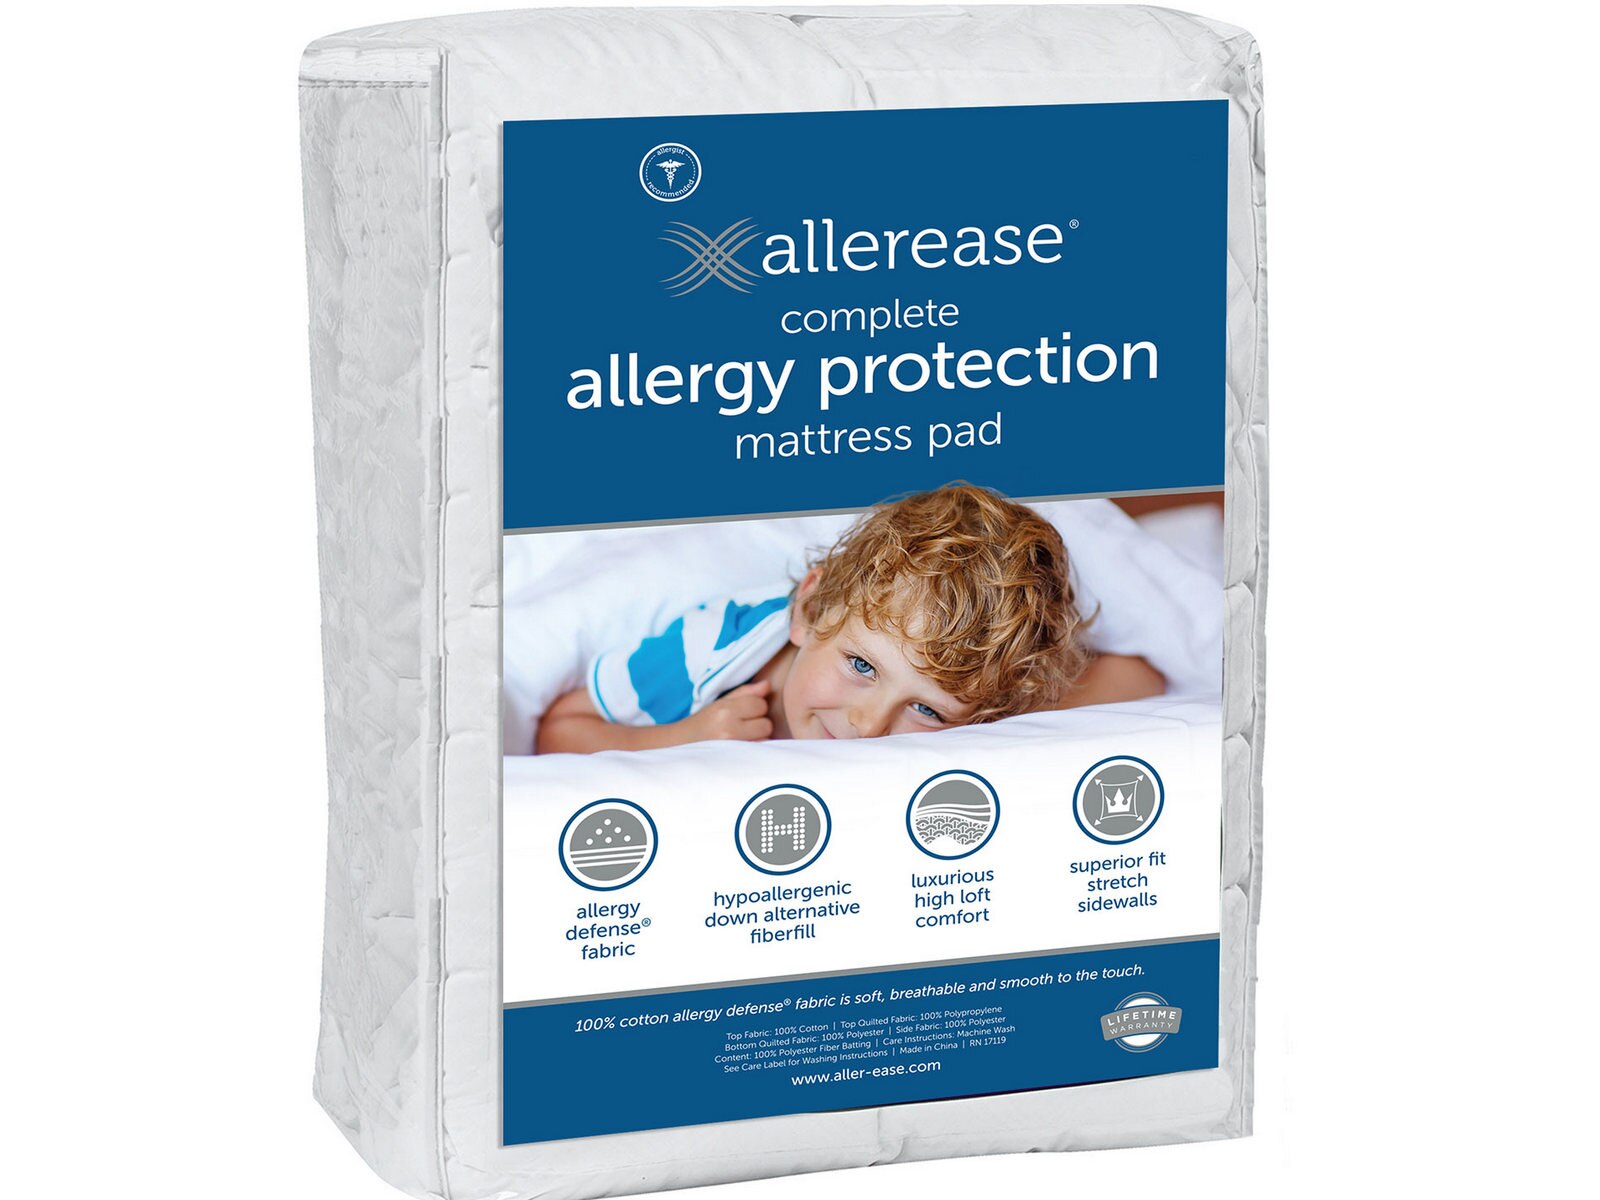 allergy protection mattress pad